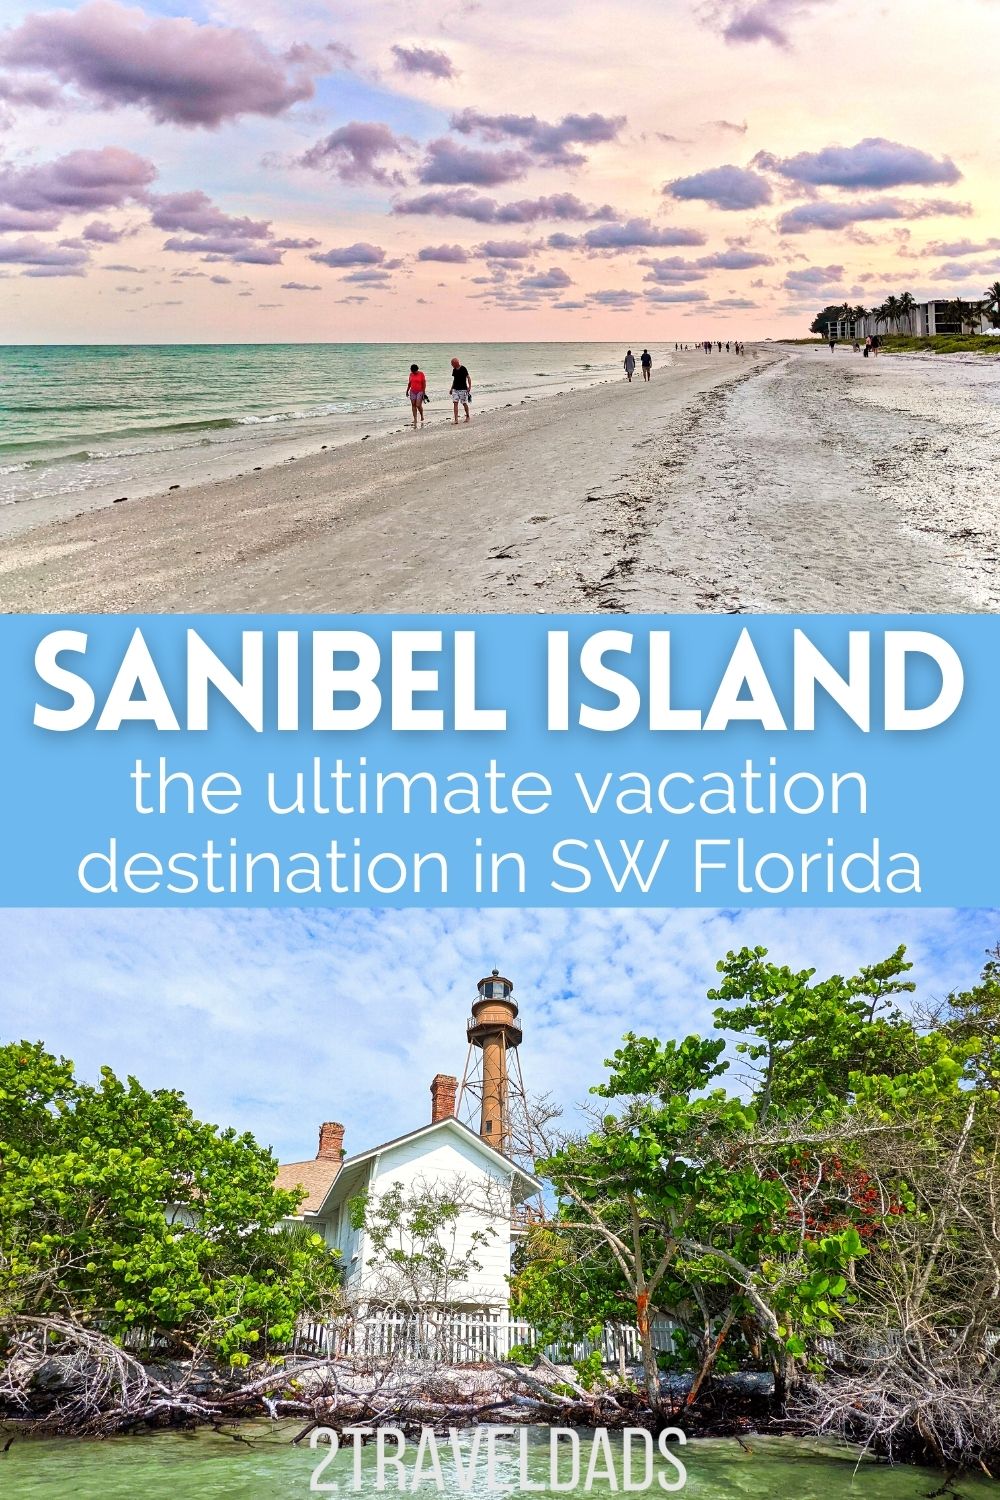 Sanibel and Captiva make for the perfect Southwest Florida vacation destination. With so many things to do, both on the beaches and not, the Seashell Capital of the World is fun, relaxing and a dream Florida escape.